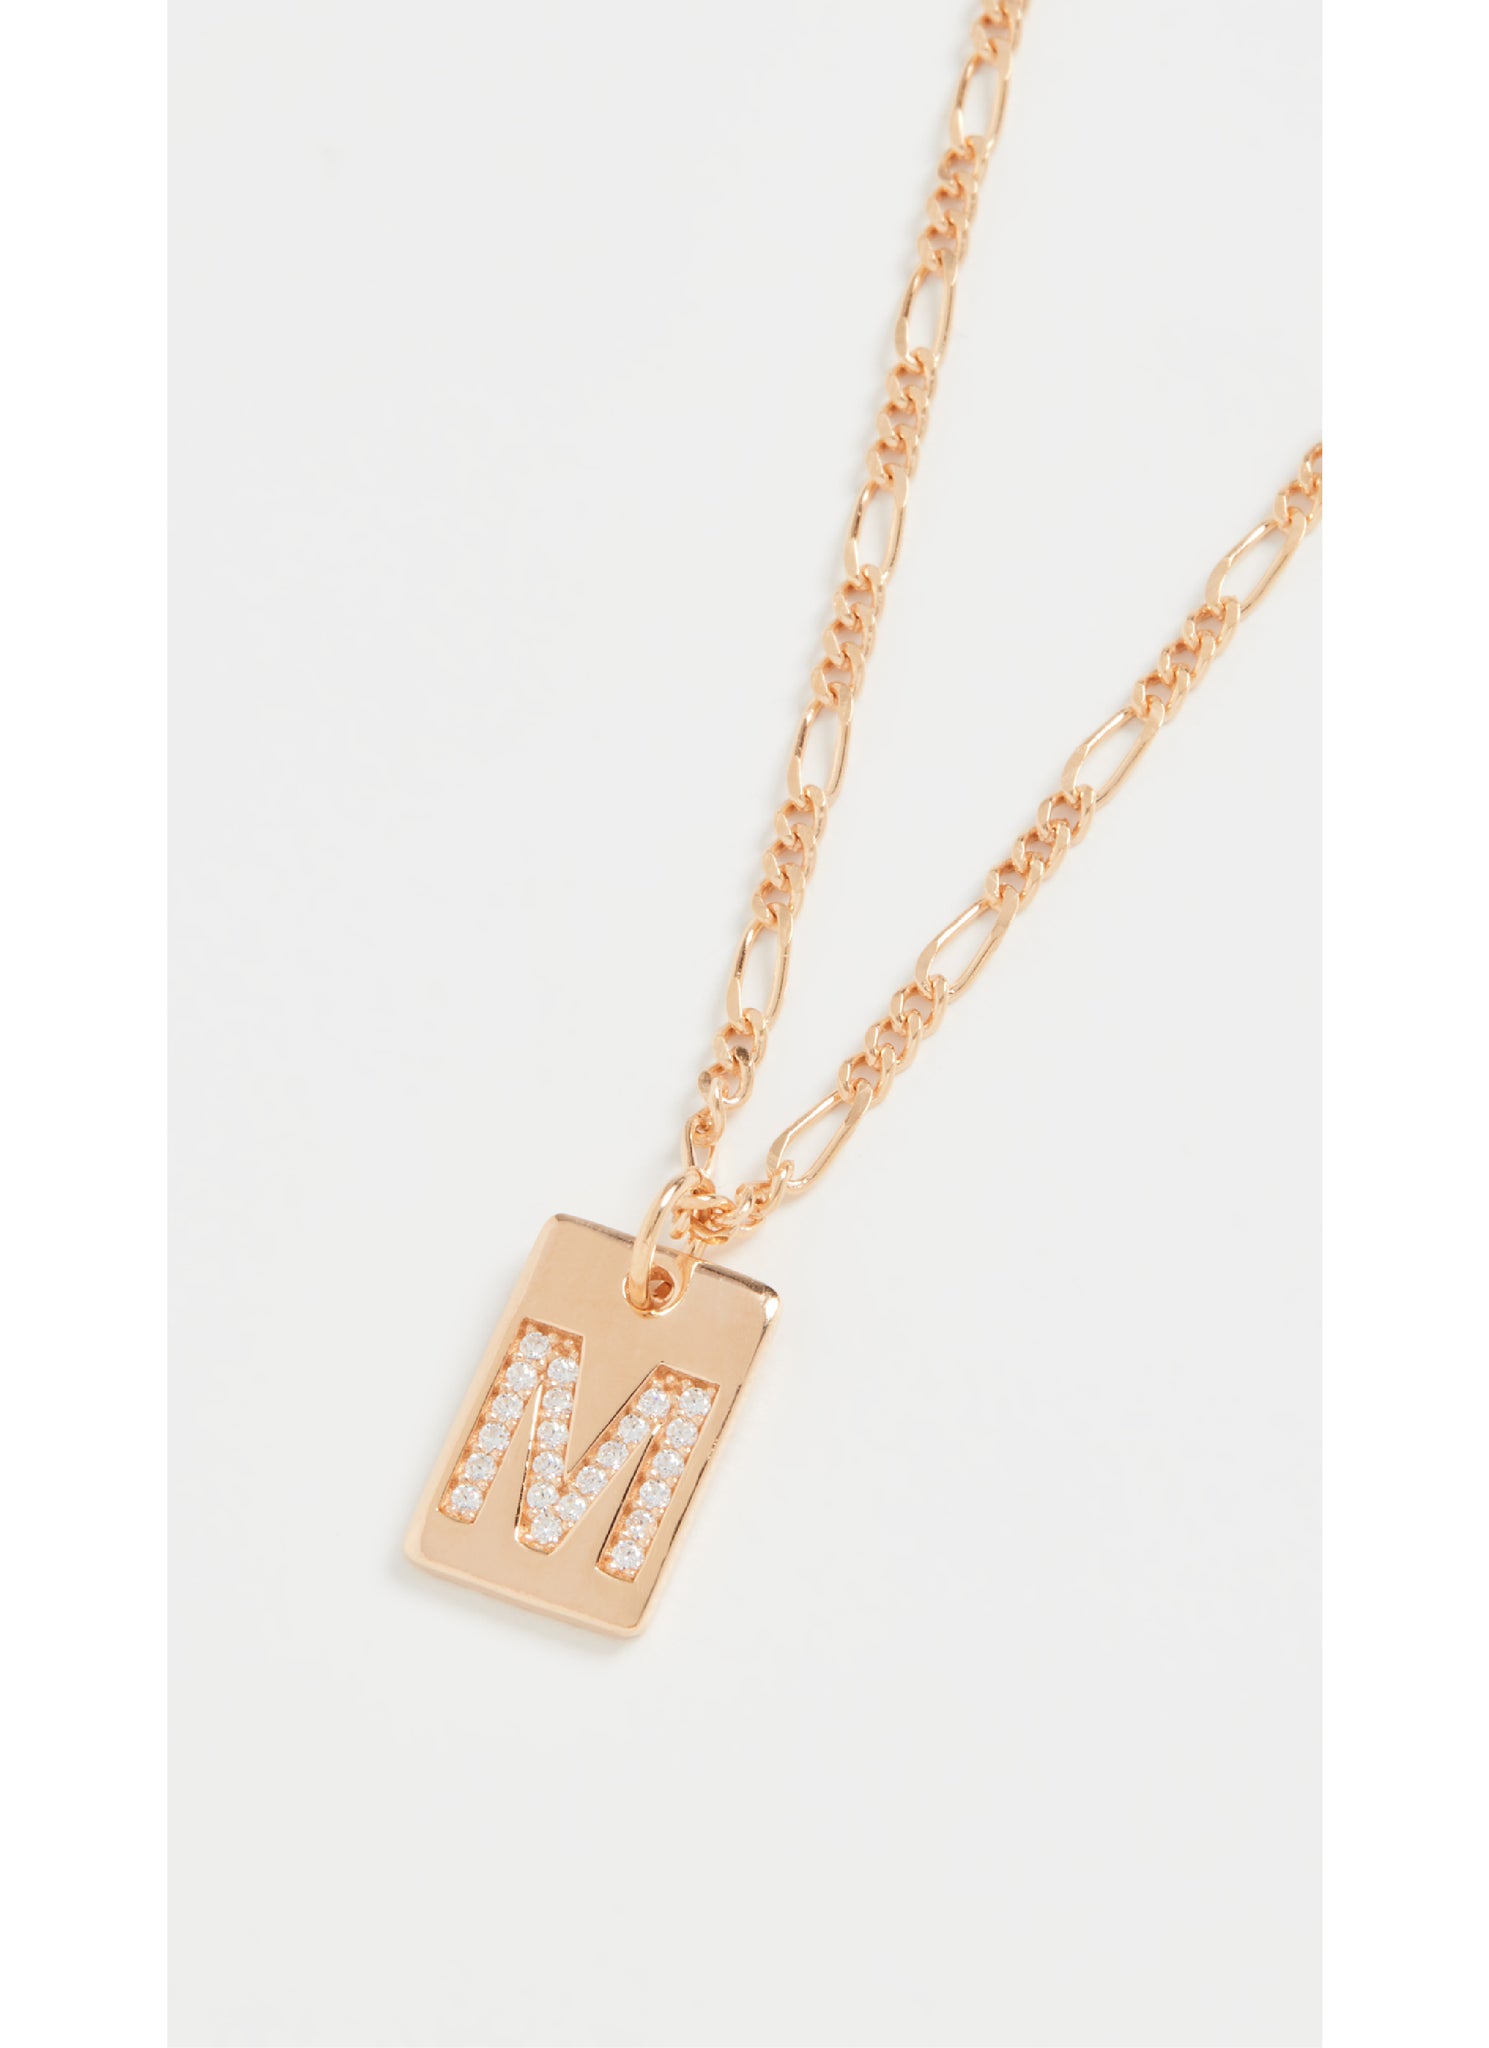 Tilly Initial Necklace in Gold